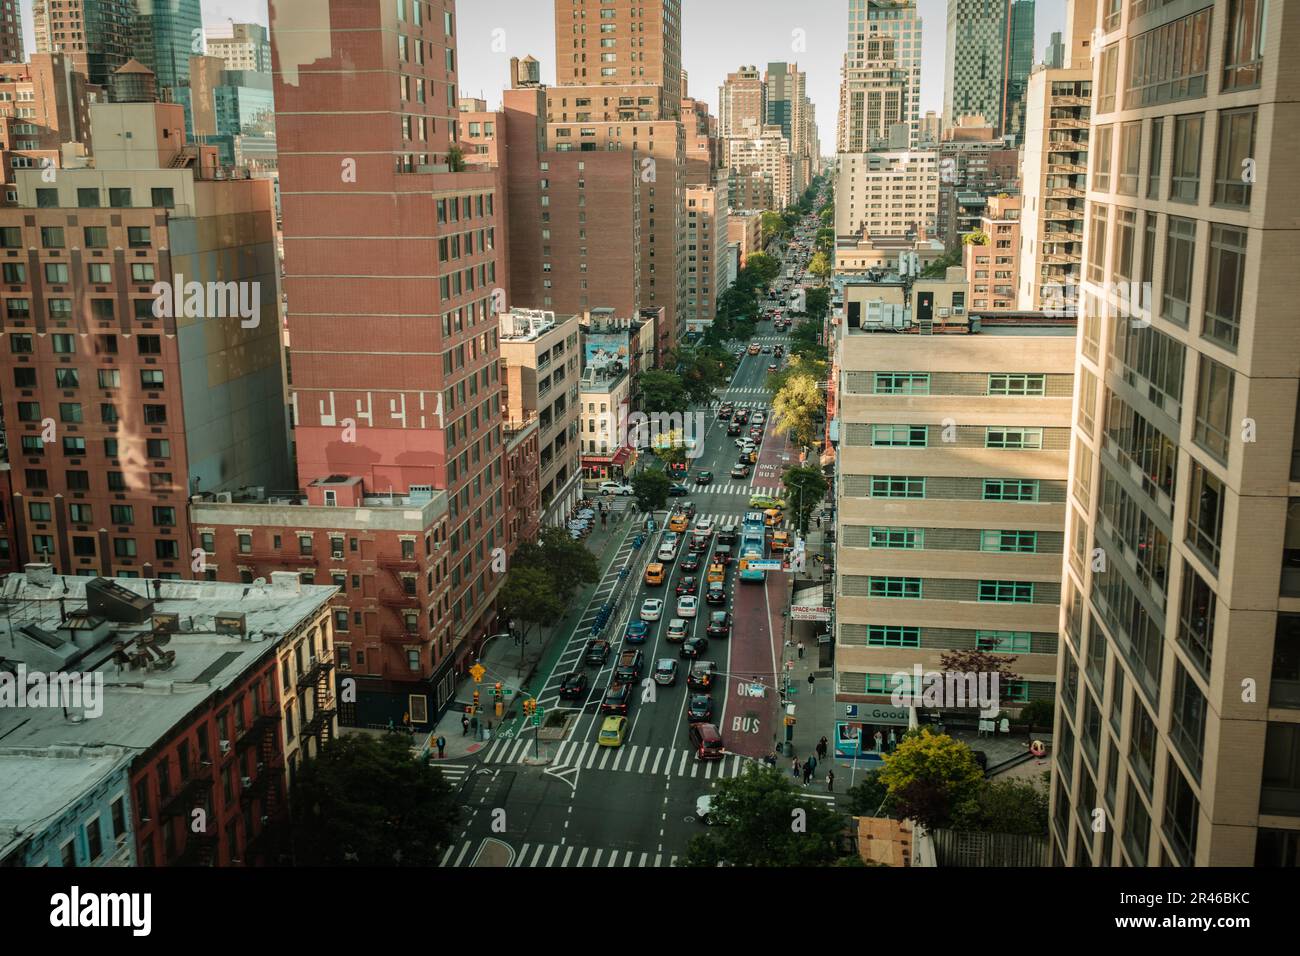 View of streets in Manhattan from the Roosevelt Island Tramway, New York City Stock Photo